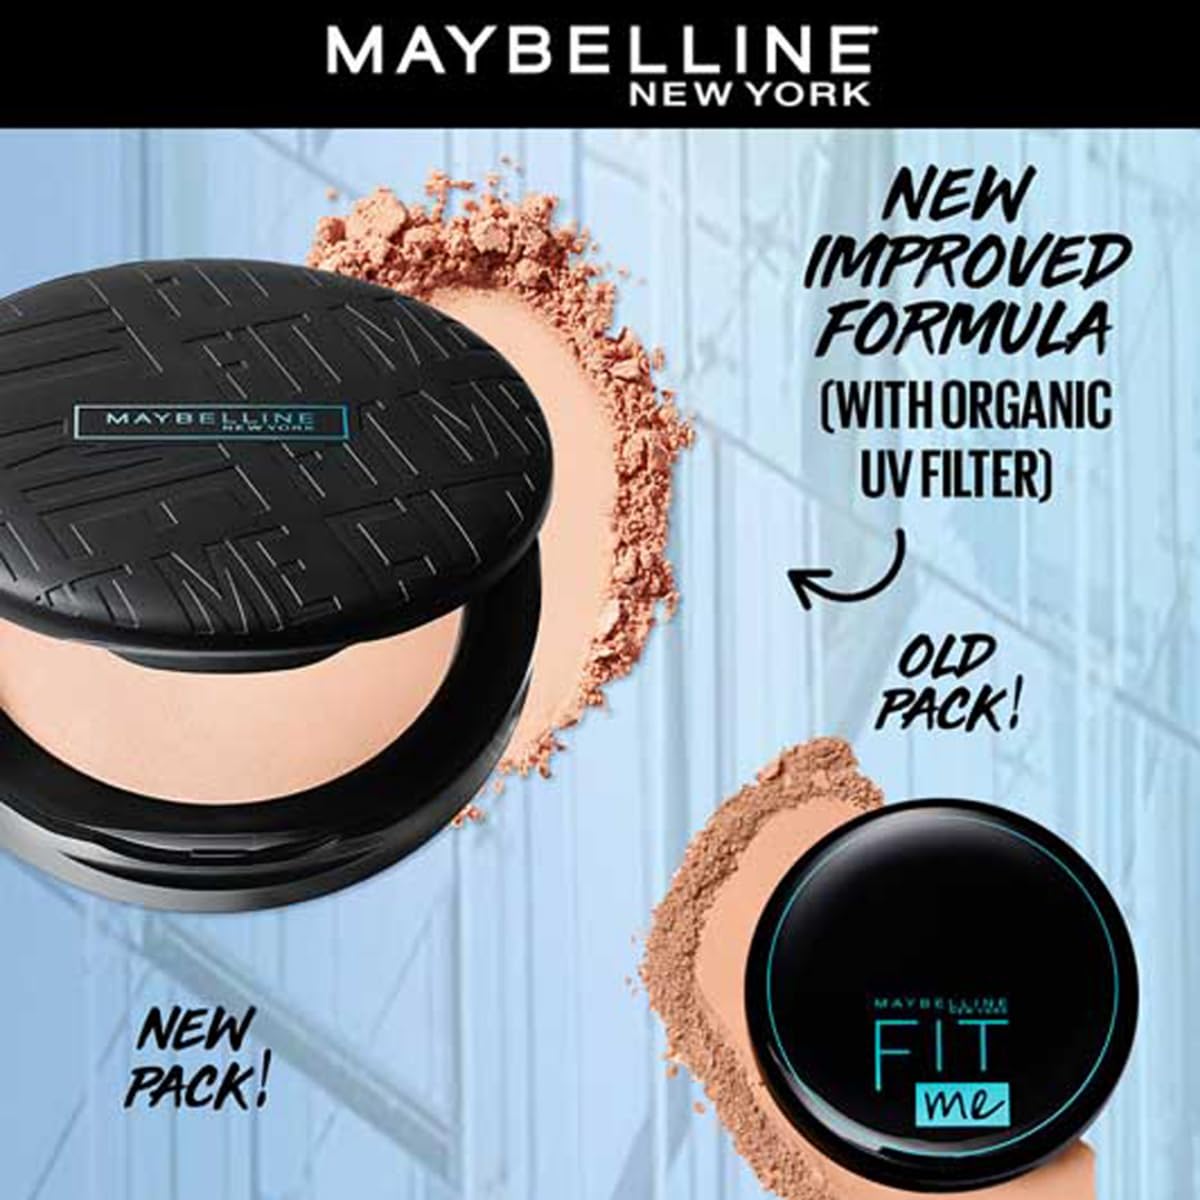 Maybelline New York Fit Me 12Hr Oil Control Compact, 128 Warm Nude